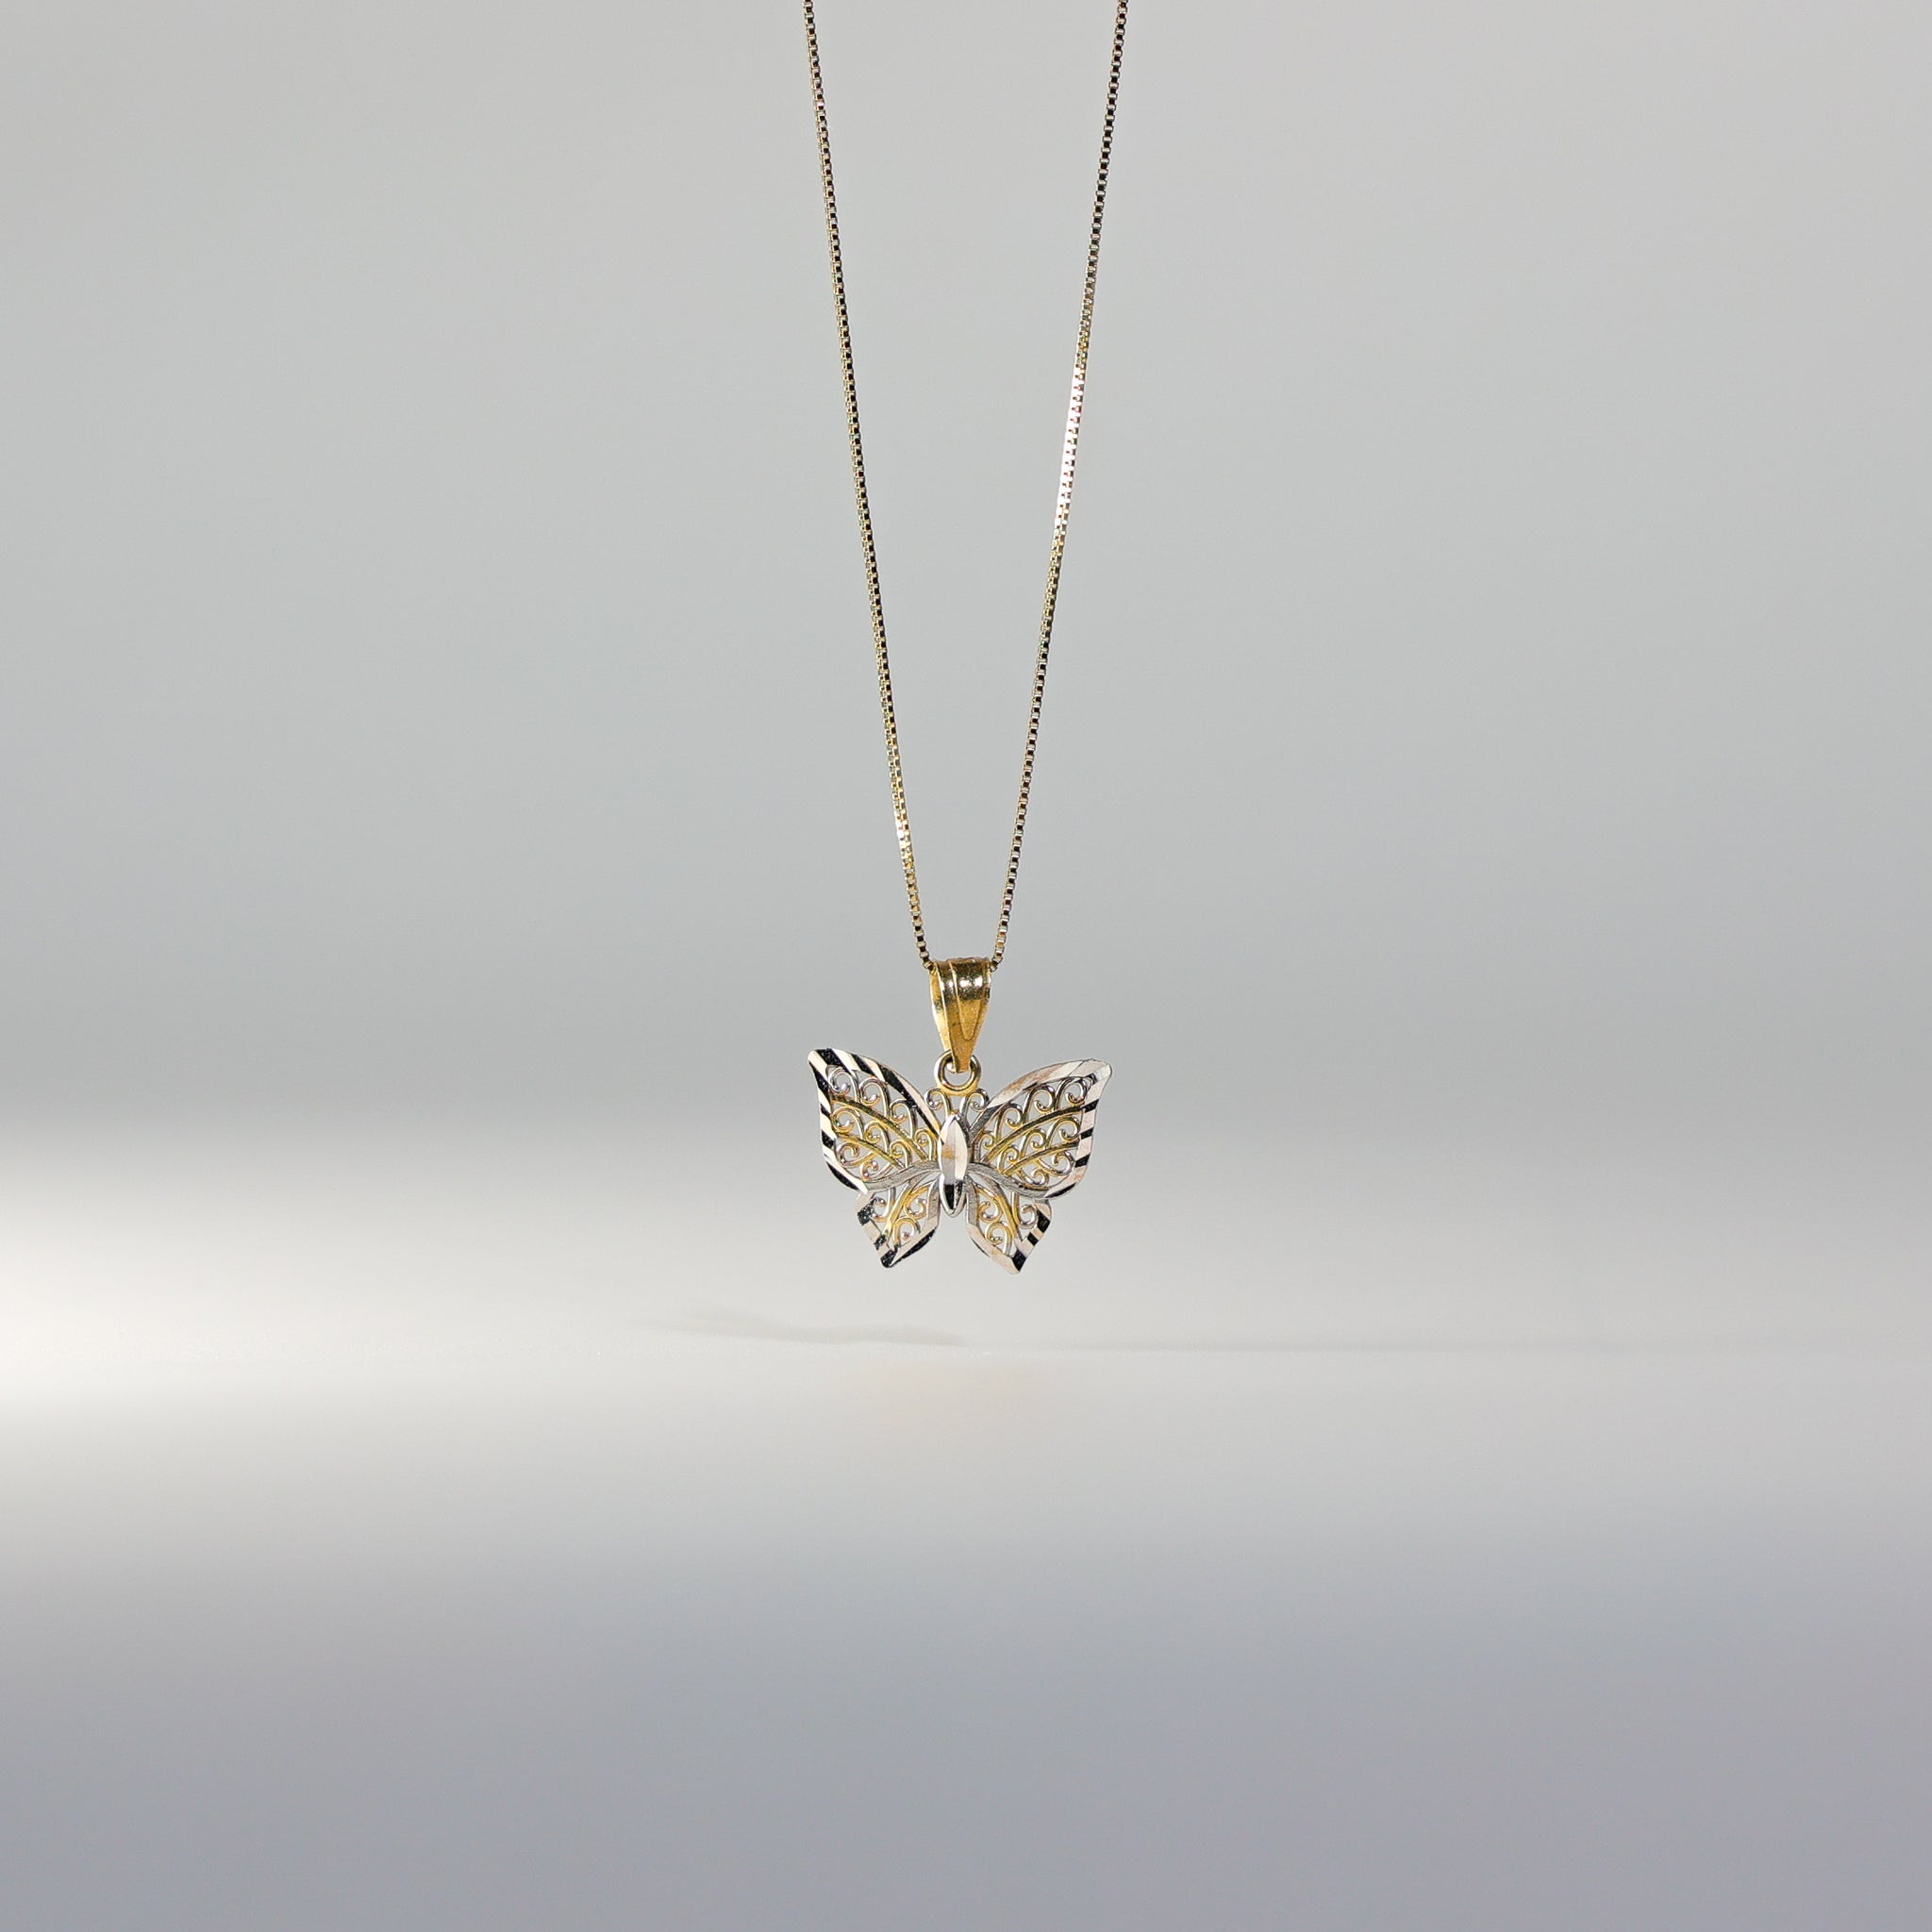 Gold Butterfly Pendant Model-434 - Charlie & Co. Jewelry